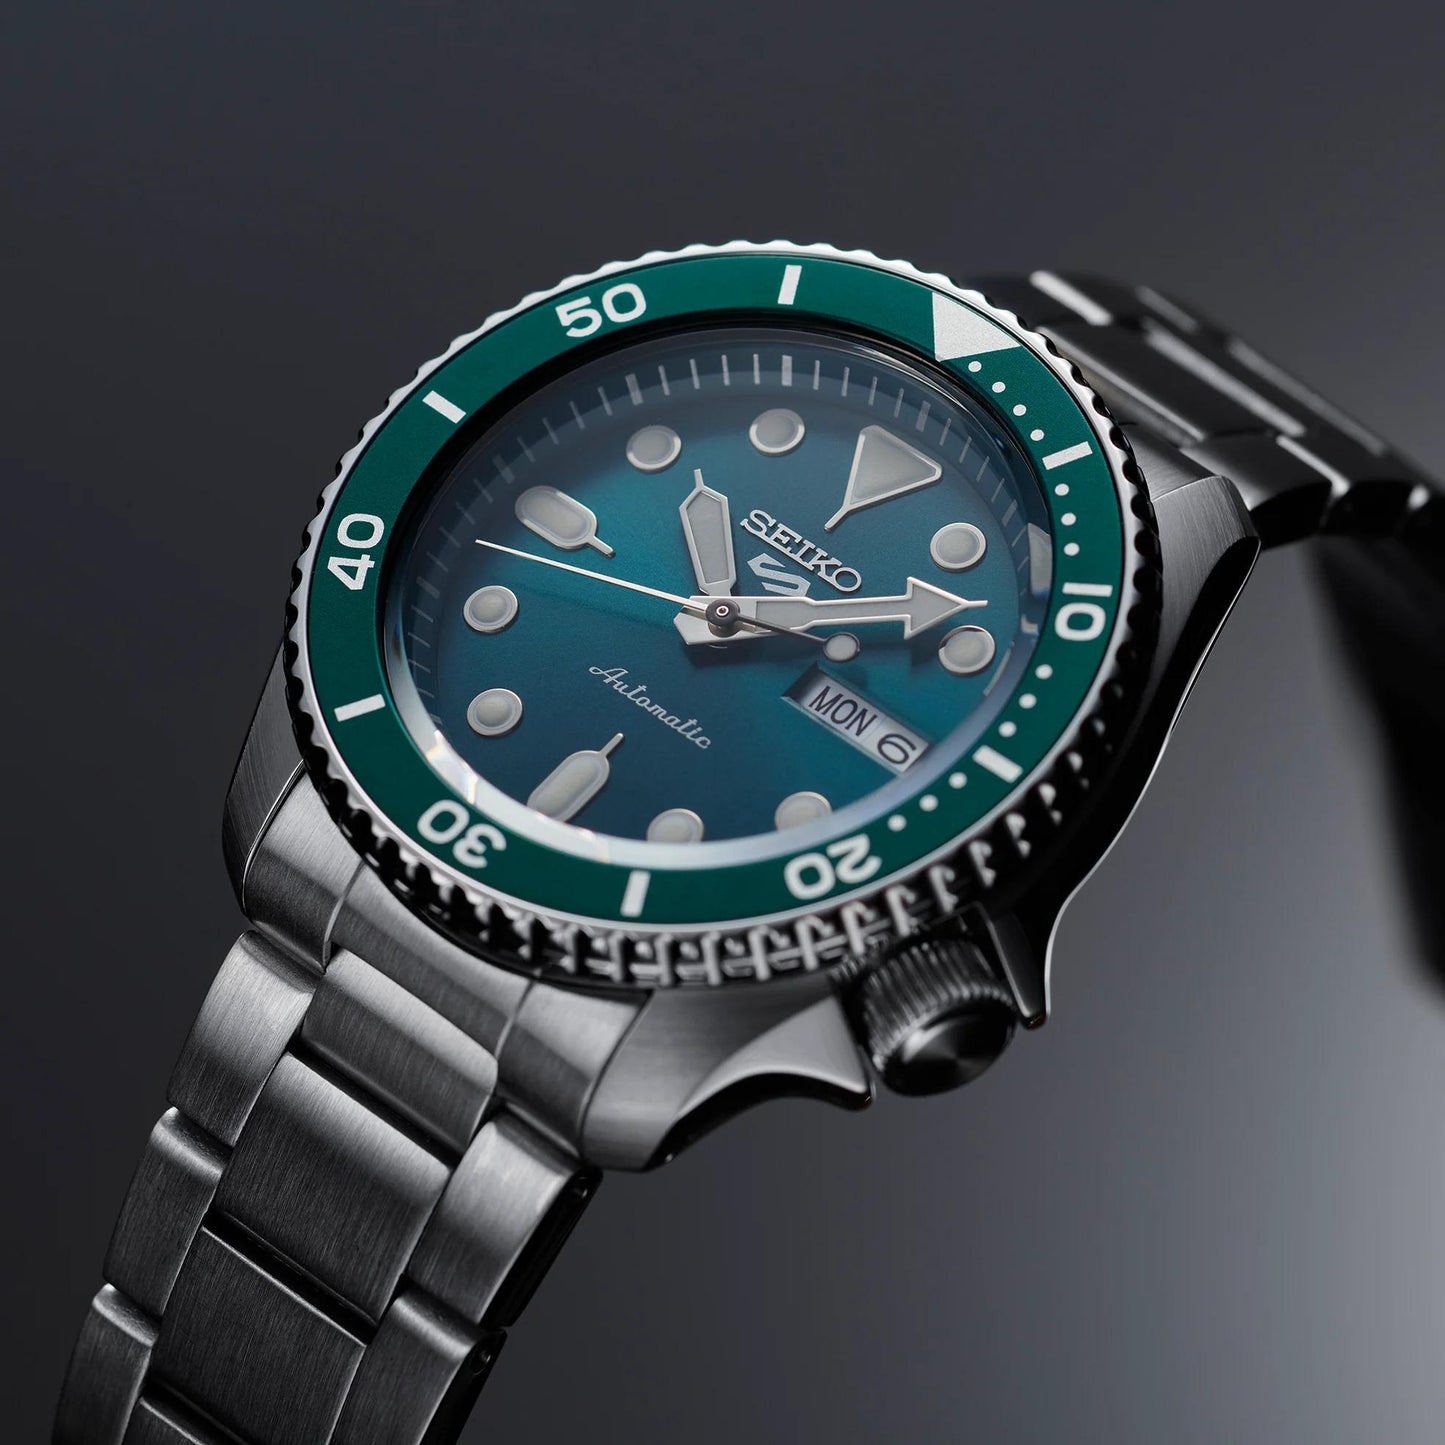 Seiko 5 Sport Automatic Green Dial Watch SRPD61